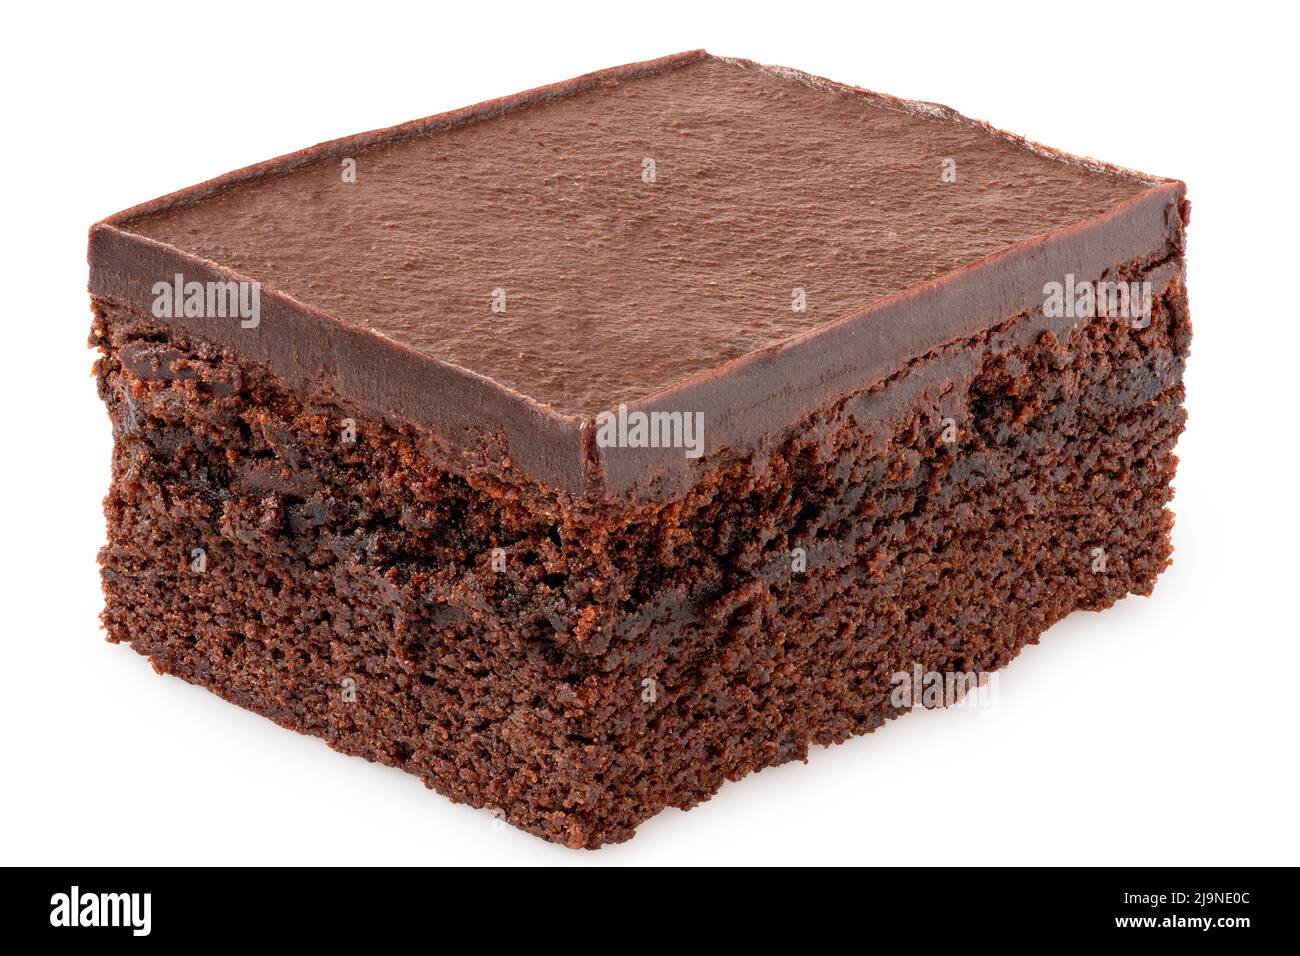 Chocolate cake square with chocolate icing isolated on white. Stock Photo